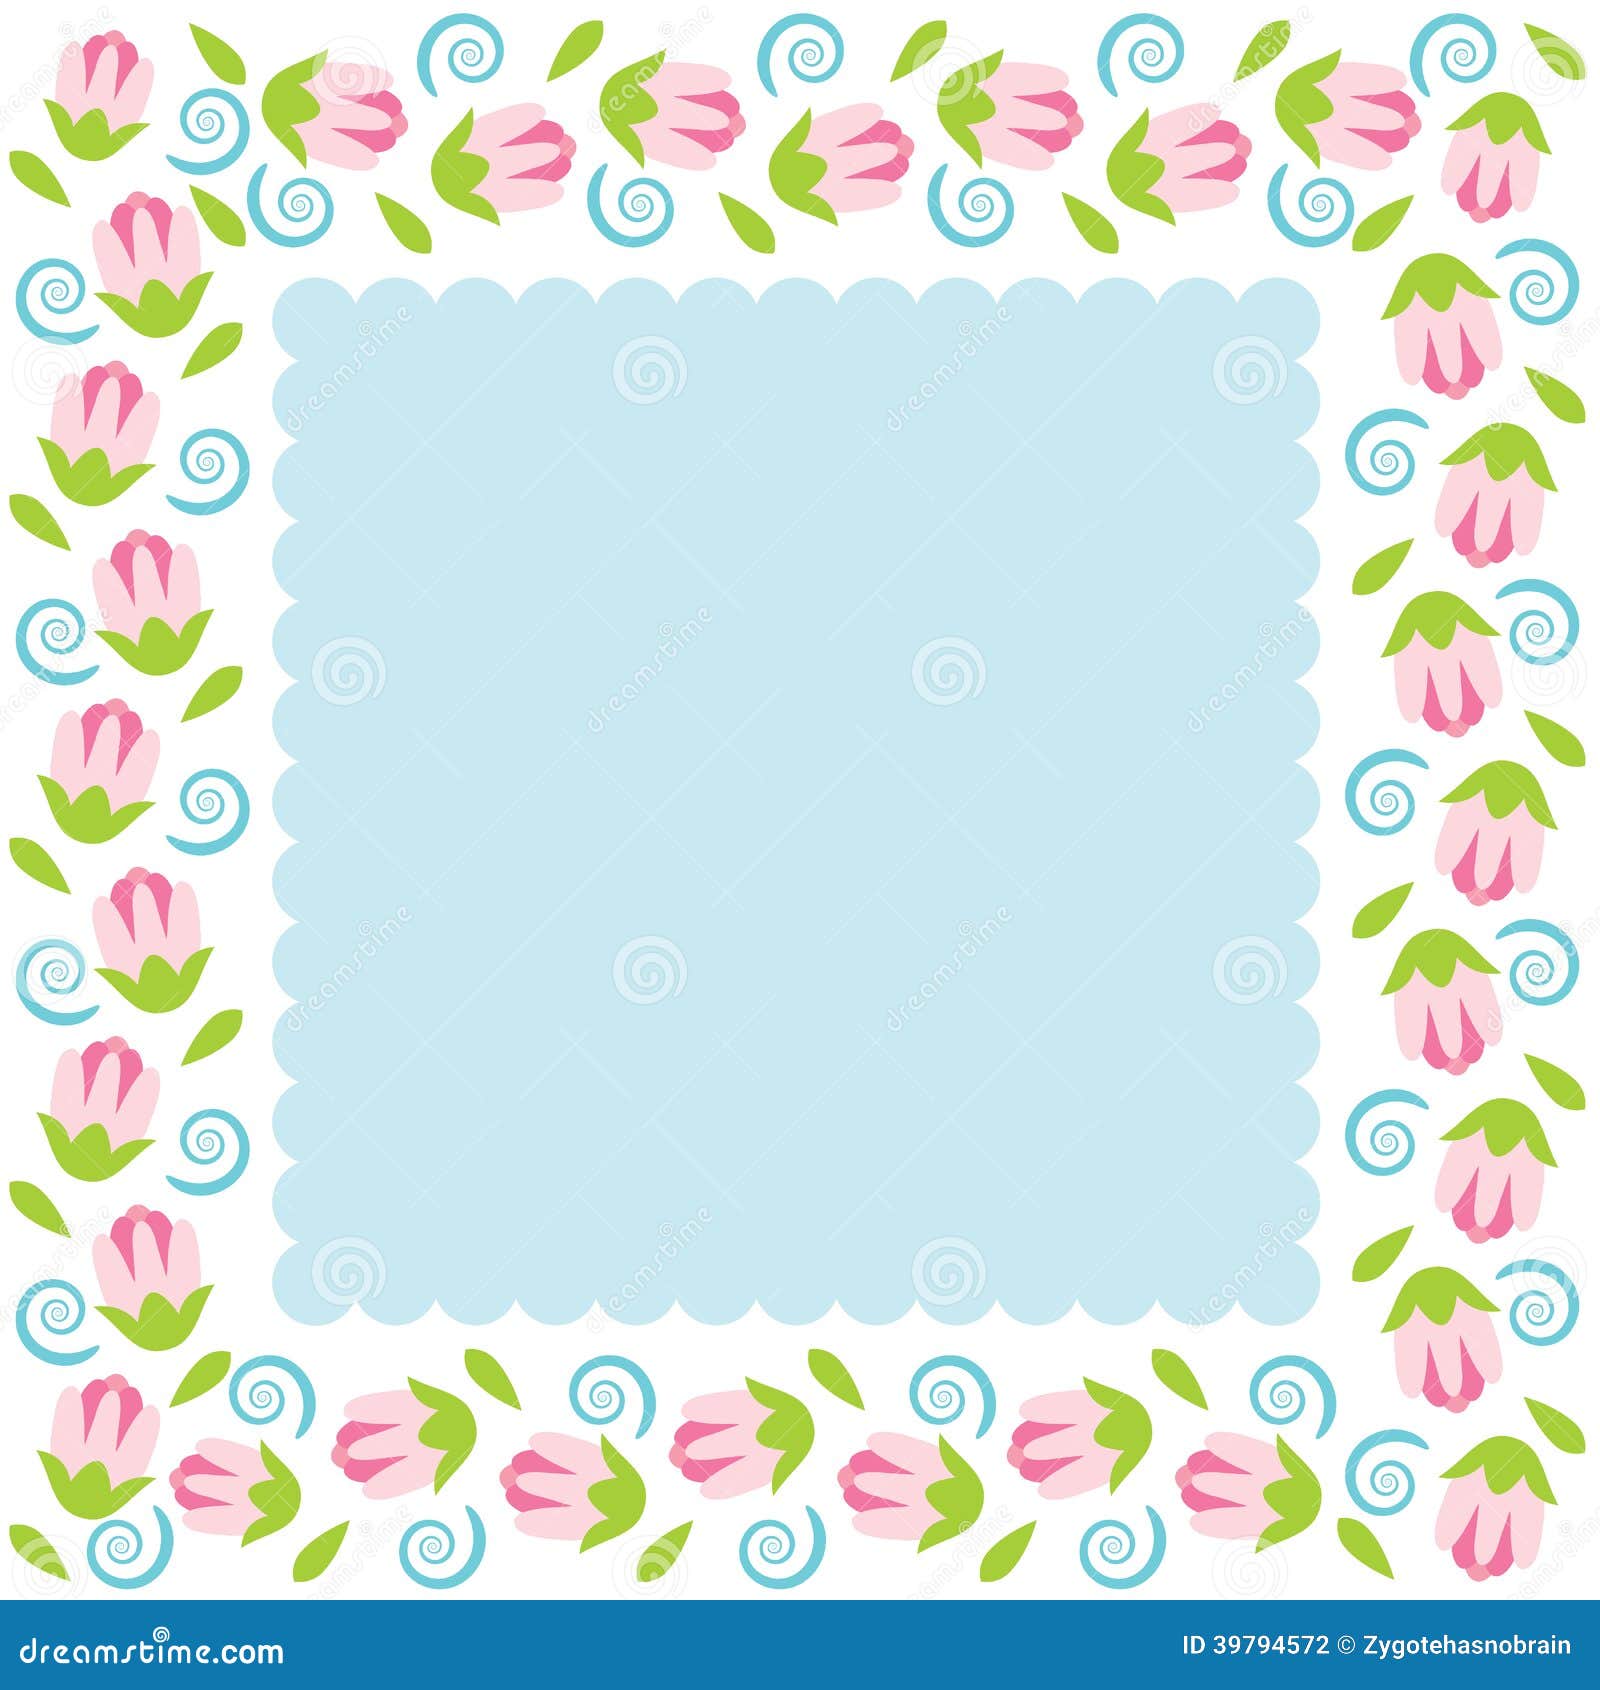 Colorful Flowers Border stock vector. Illustration of pattern - 39794572